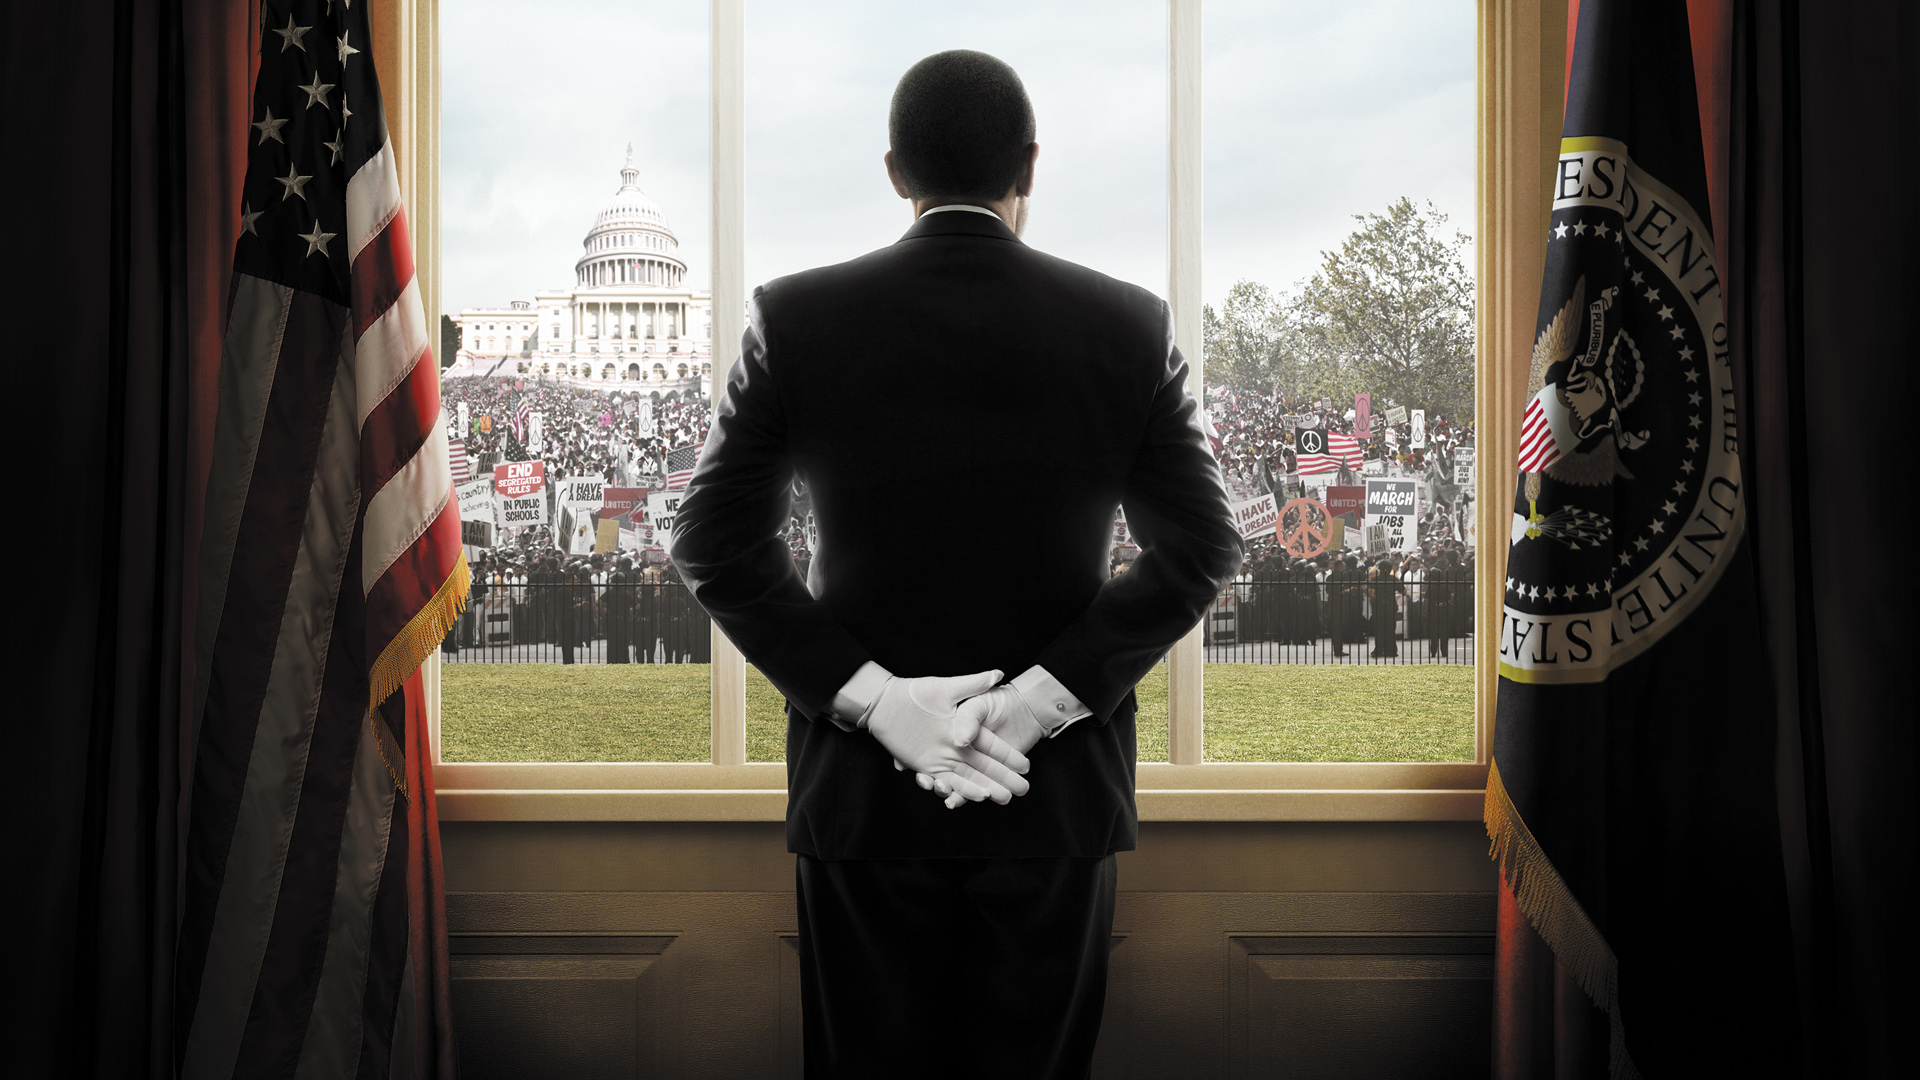 Movie The Butler HD Wallpaper | Background Image